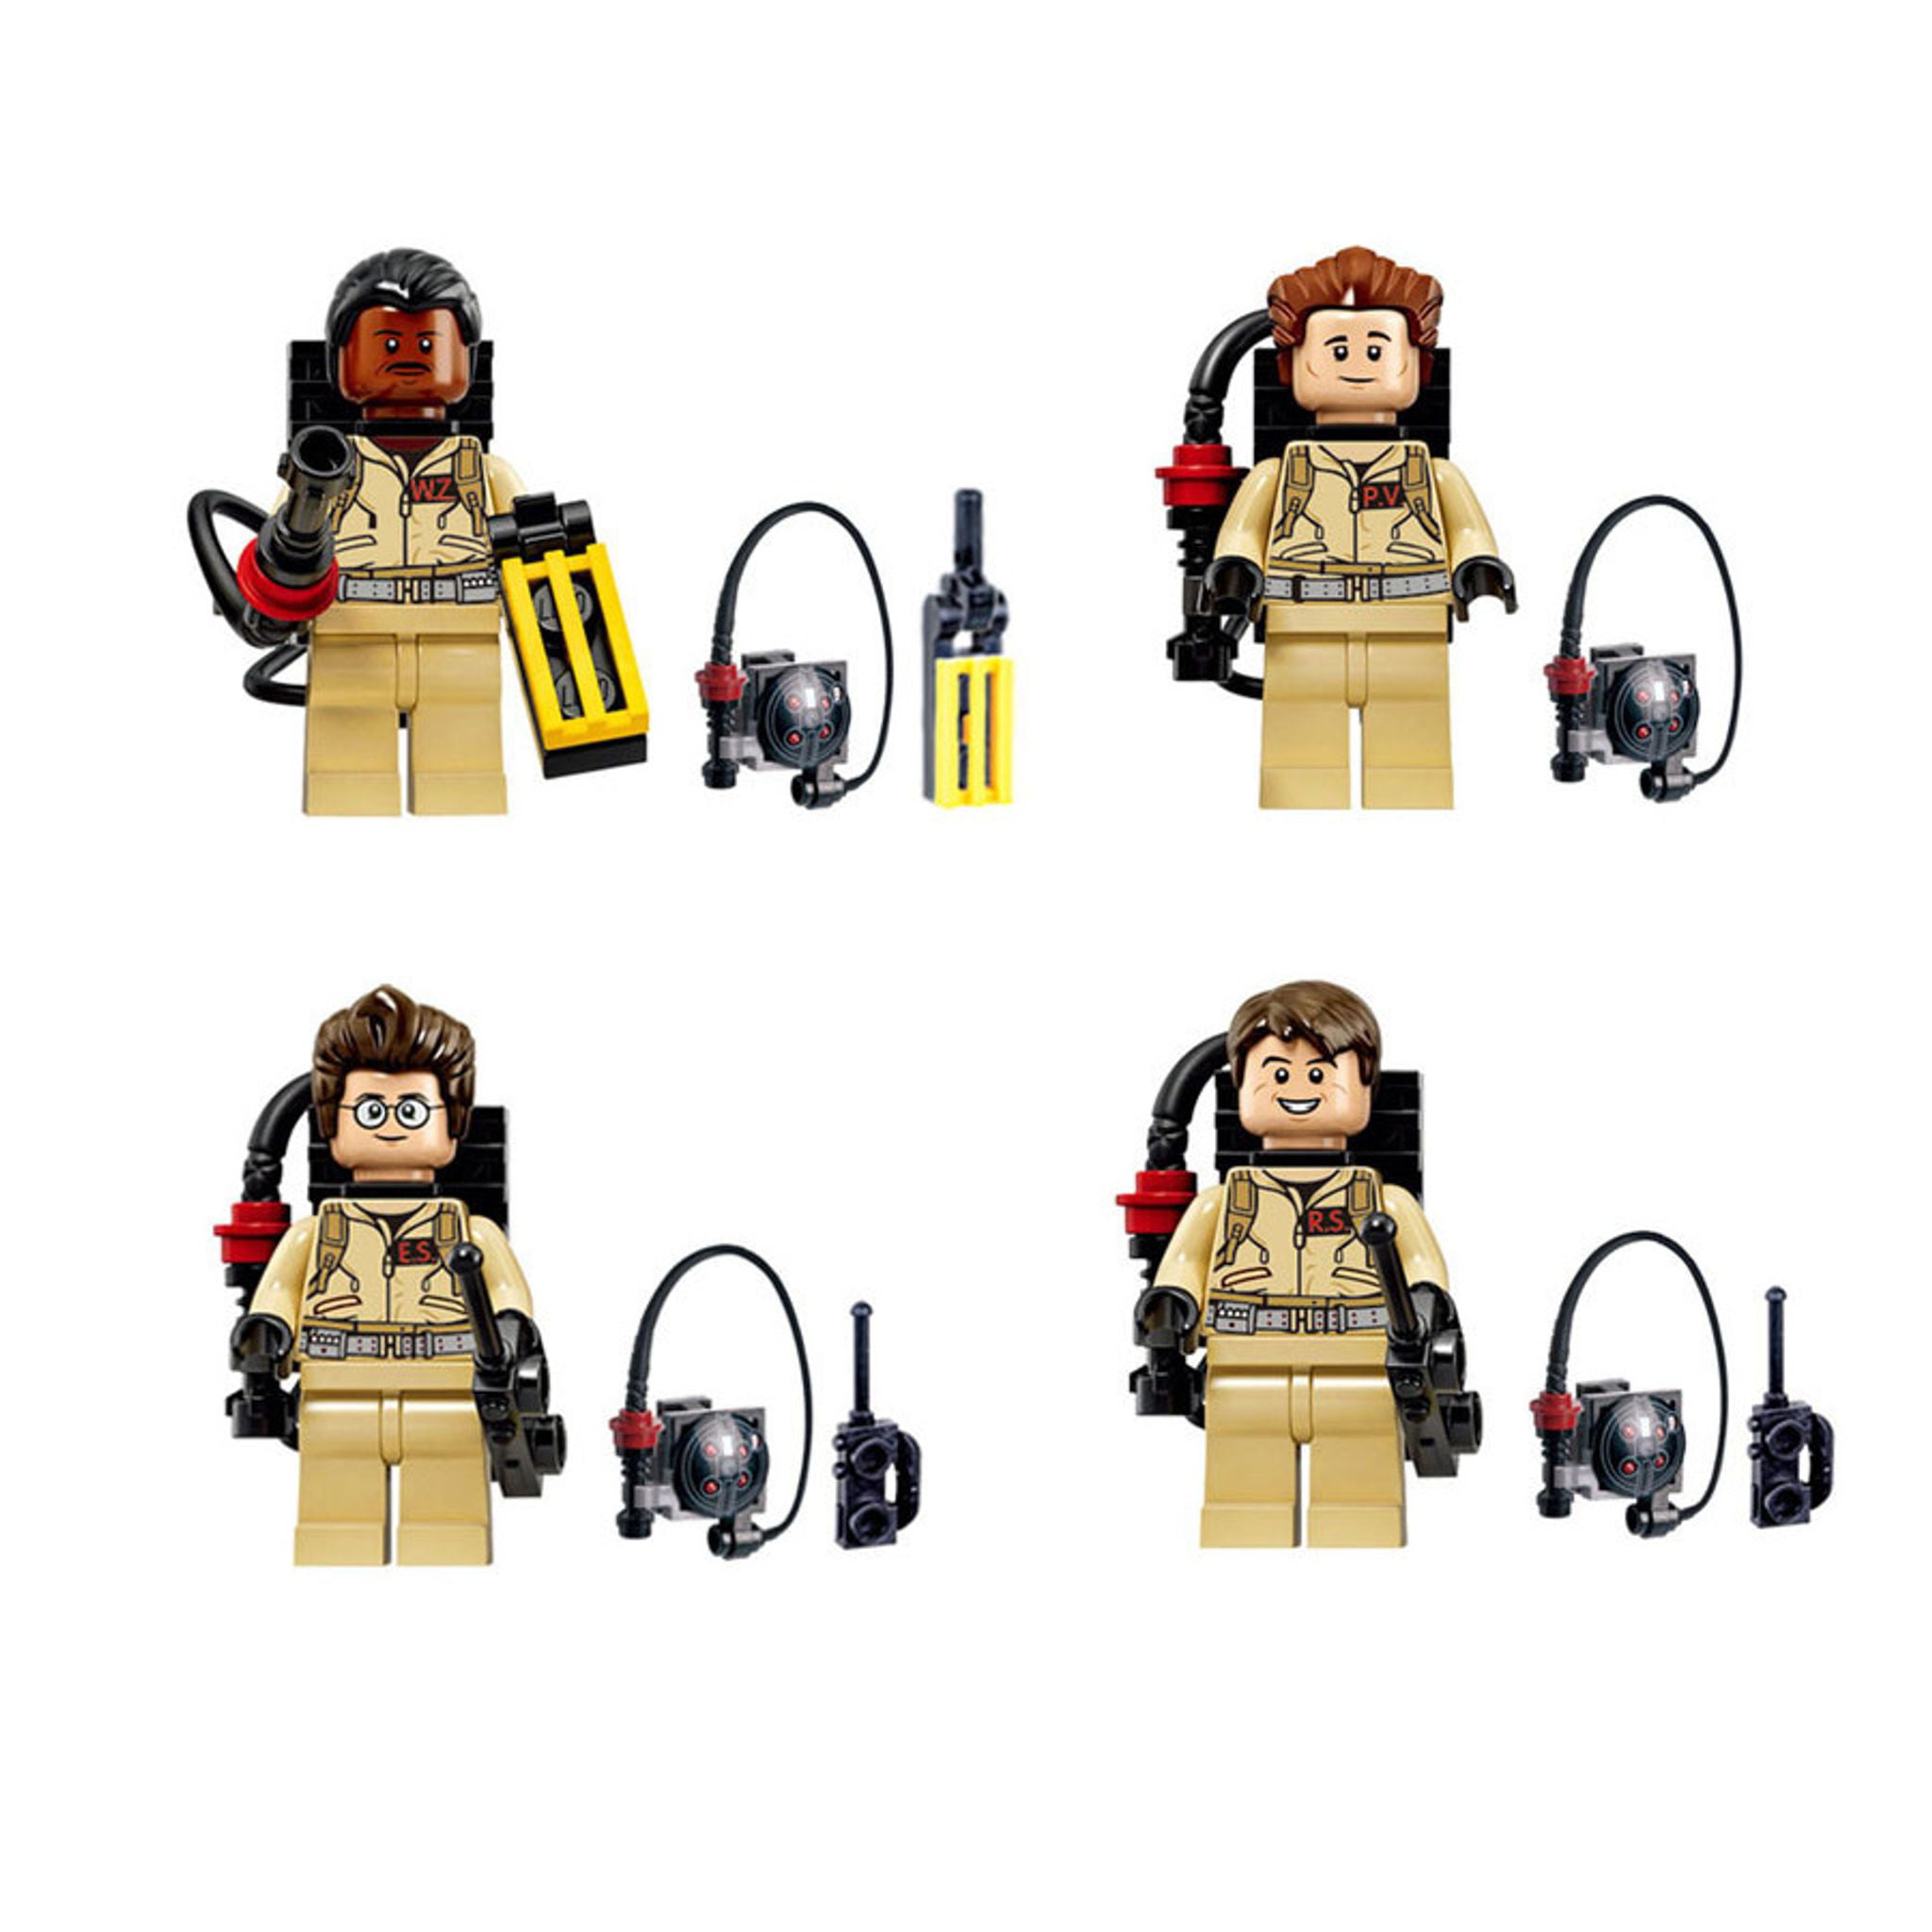 4 Stk Ghost Busters Mini Figures Ghostbusters Building Blocks Toys Gift Fit lego 